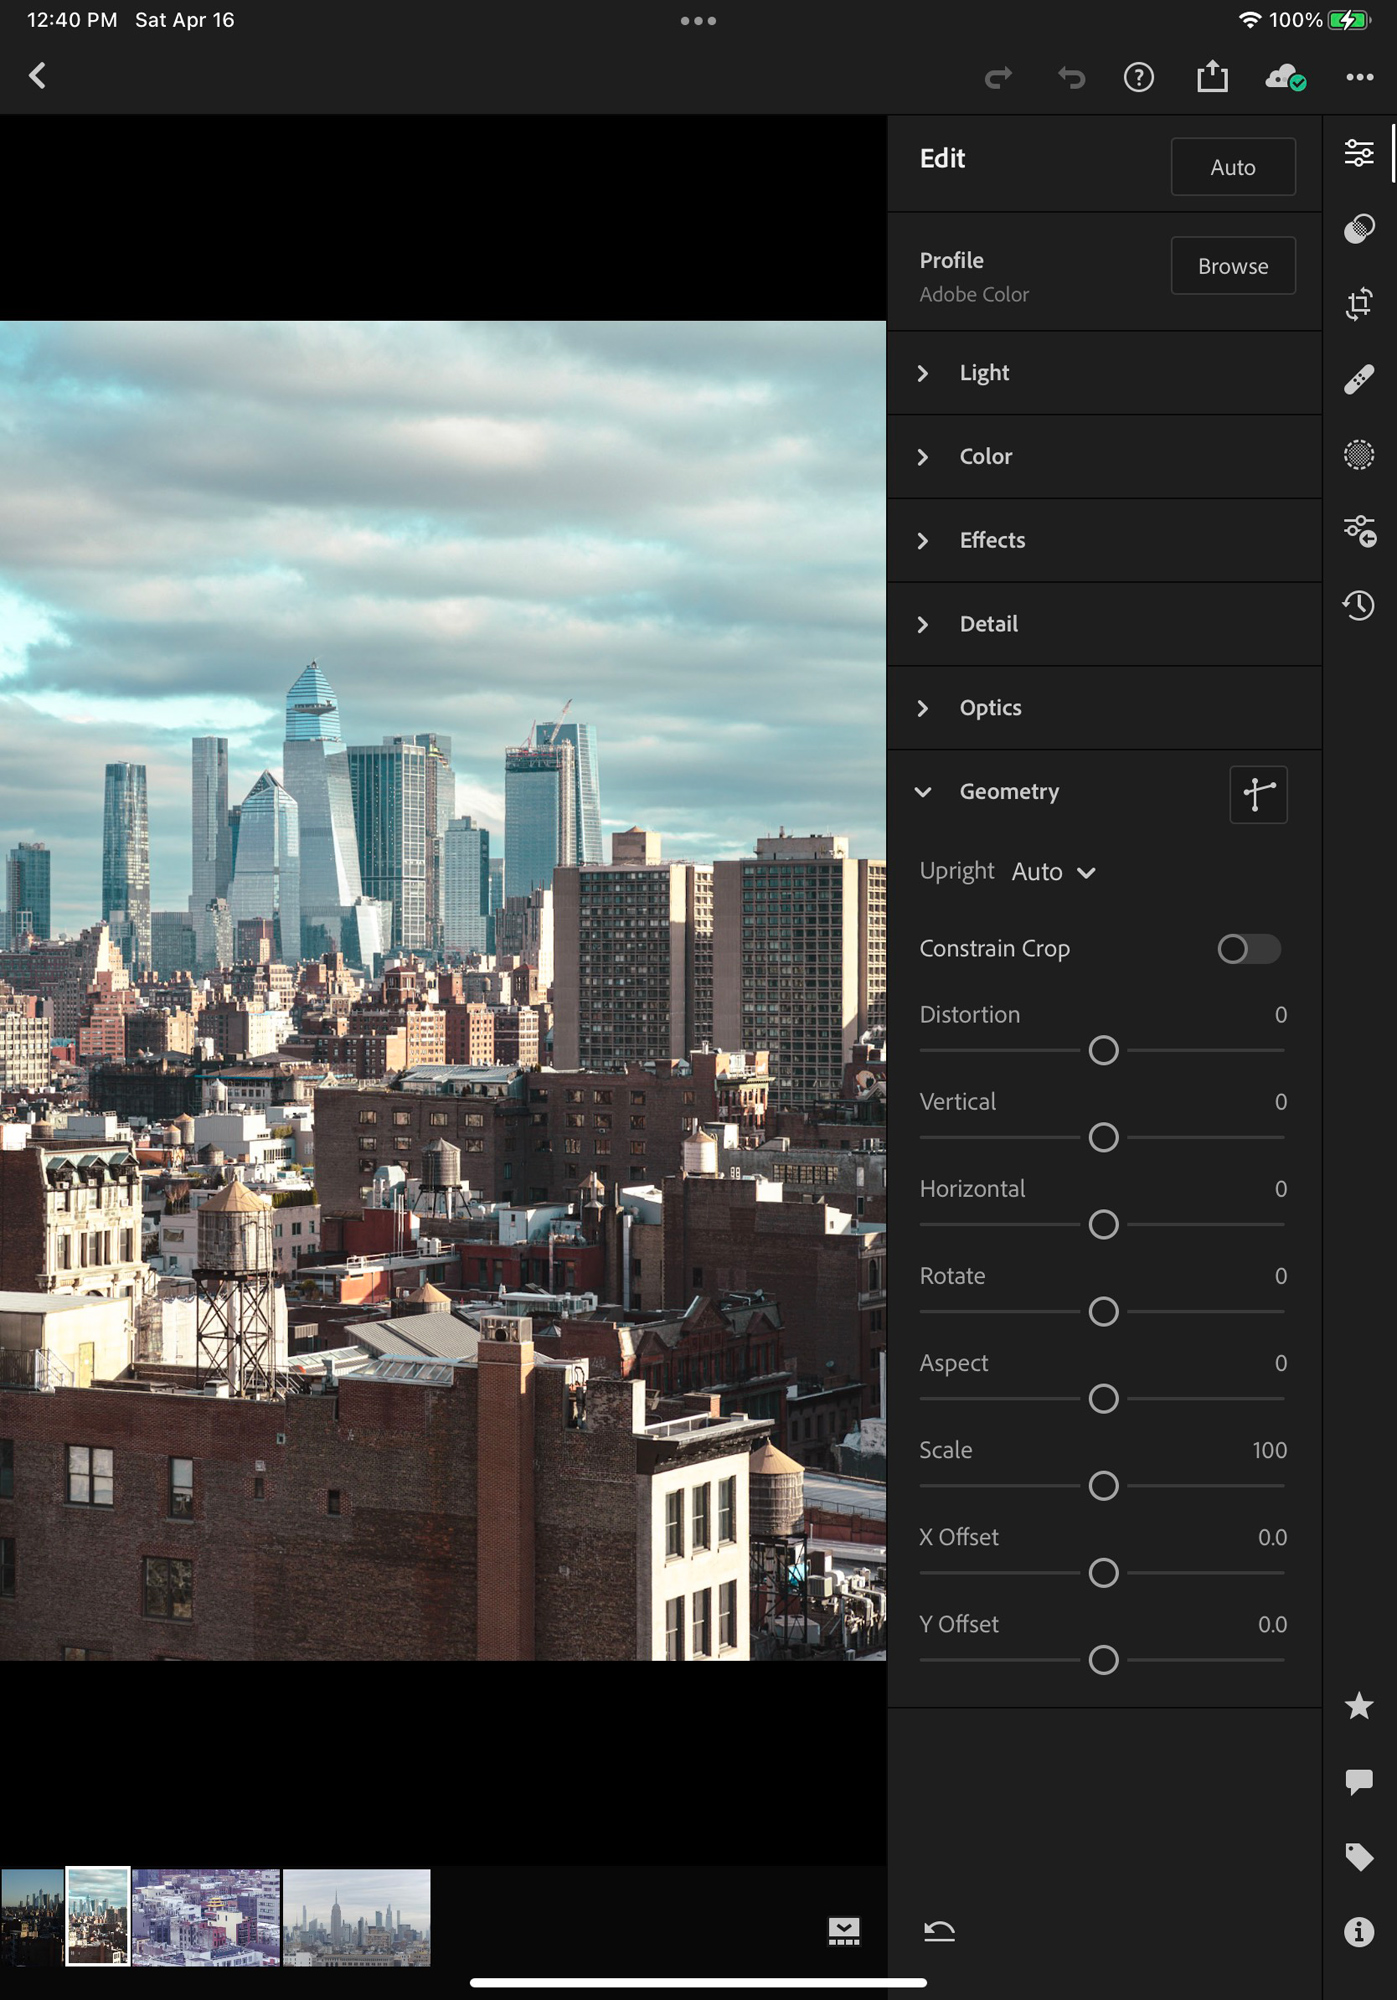 An Image Opened in Lightroom Mobile That is Ready for Editing